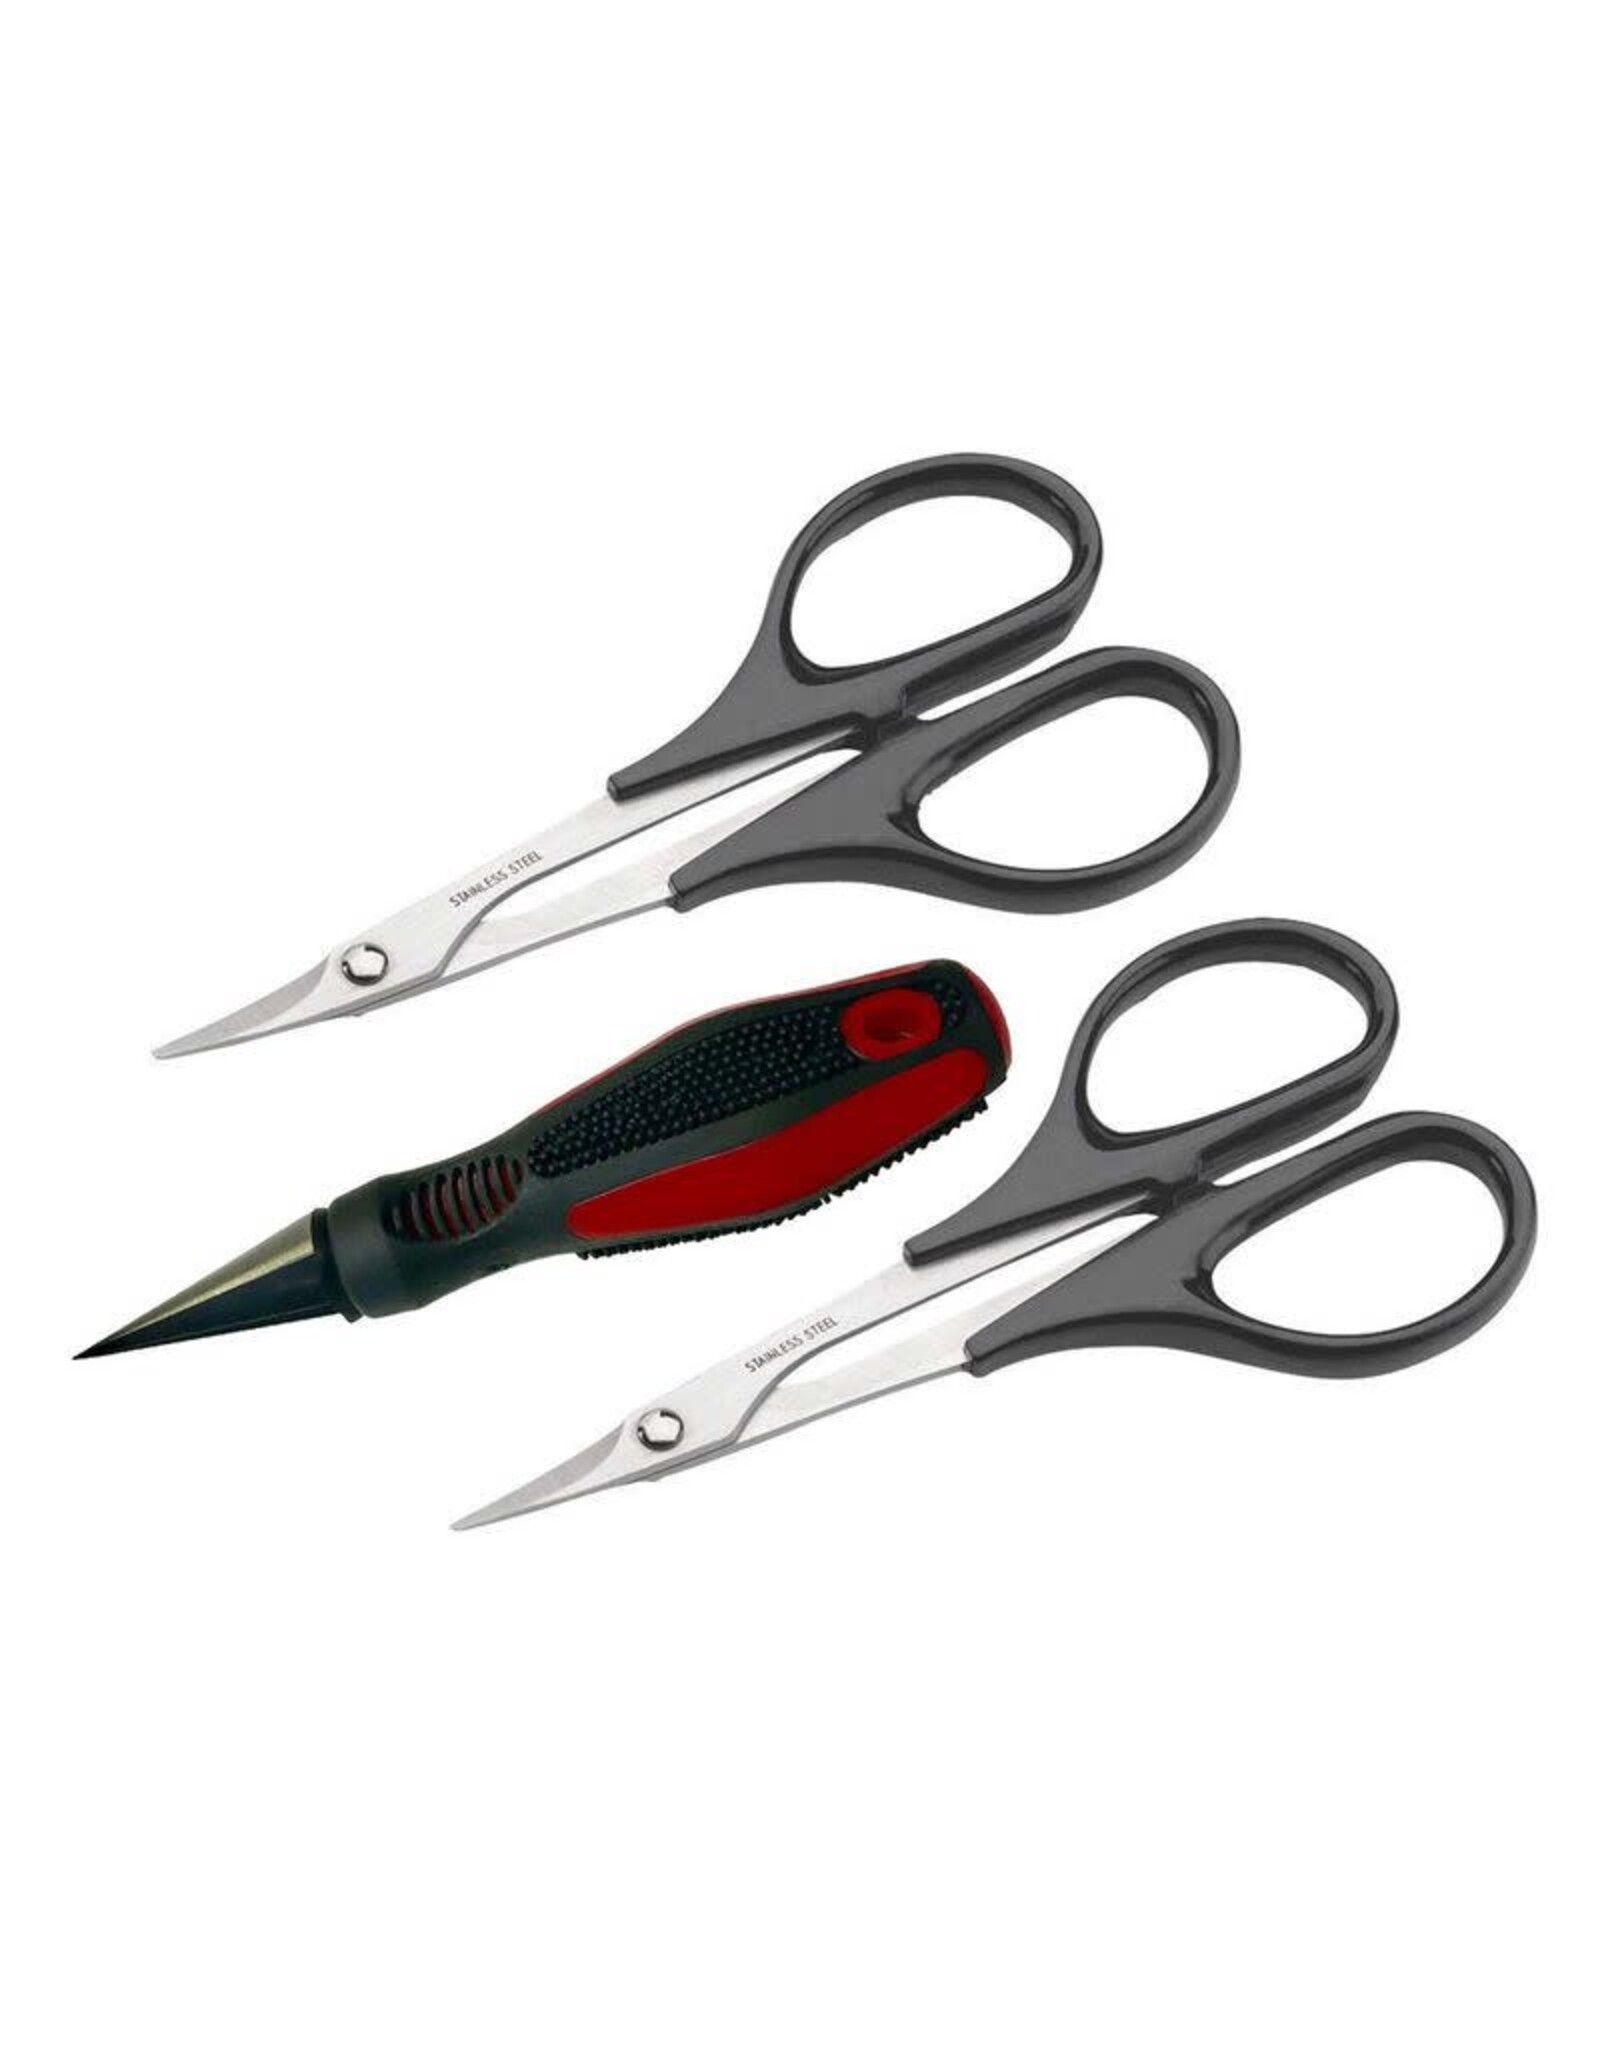 Dubro Body Reamer, Scissors (Curved and Straight) Set